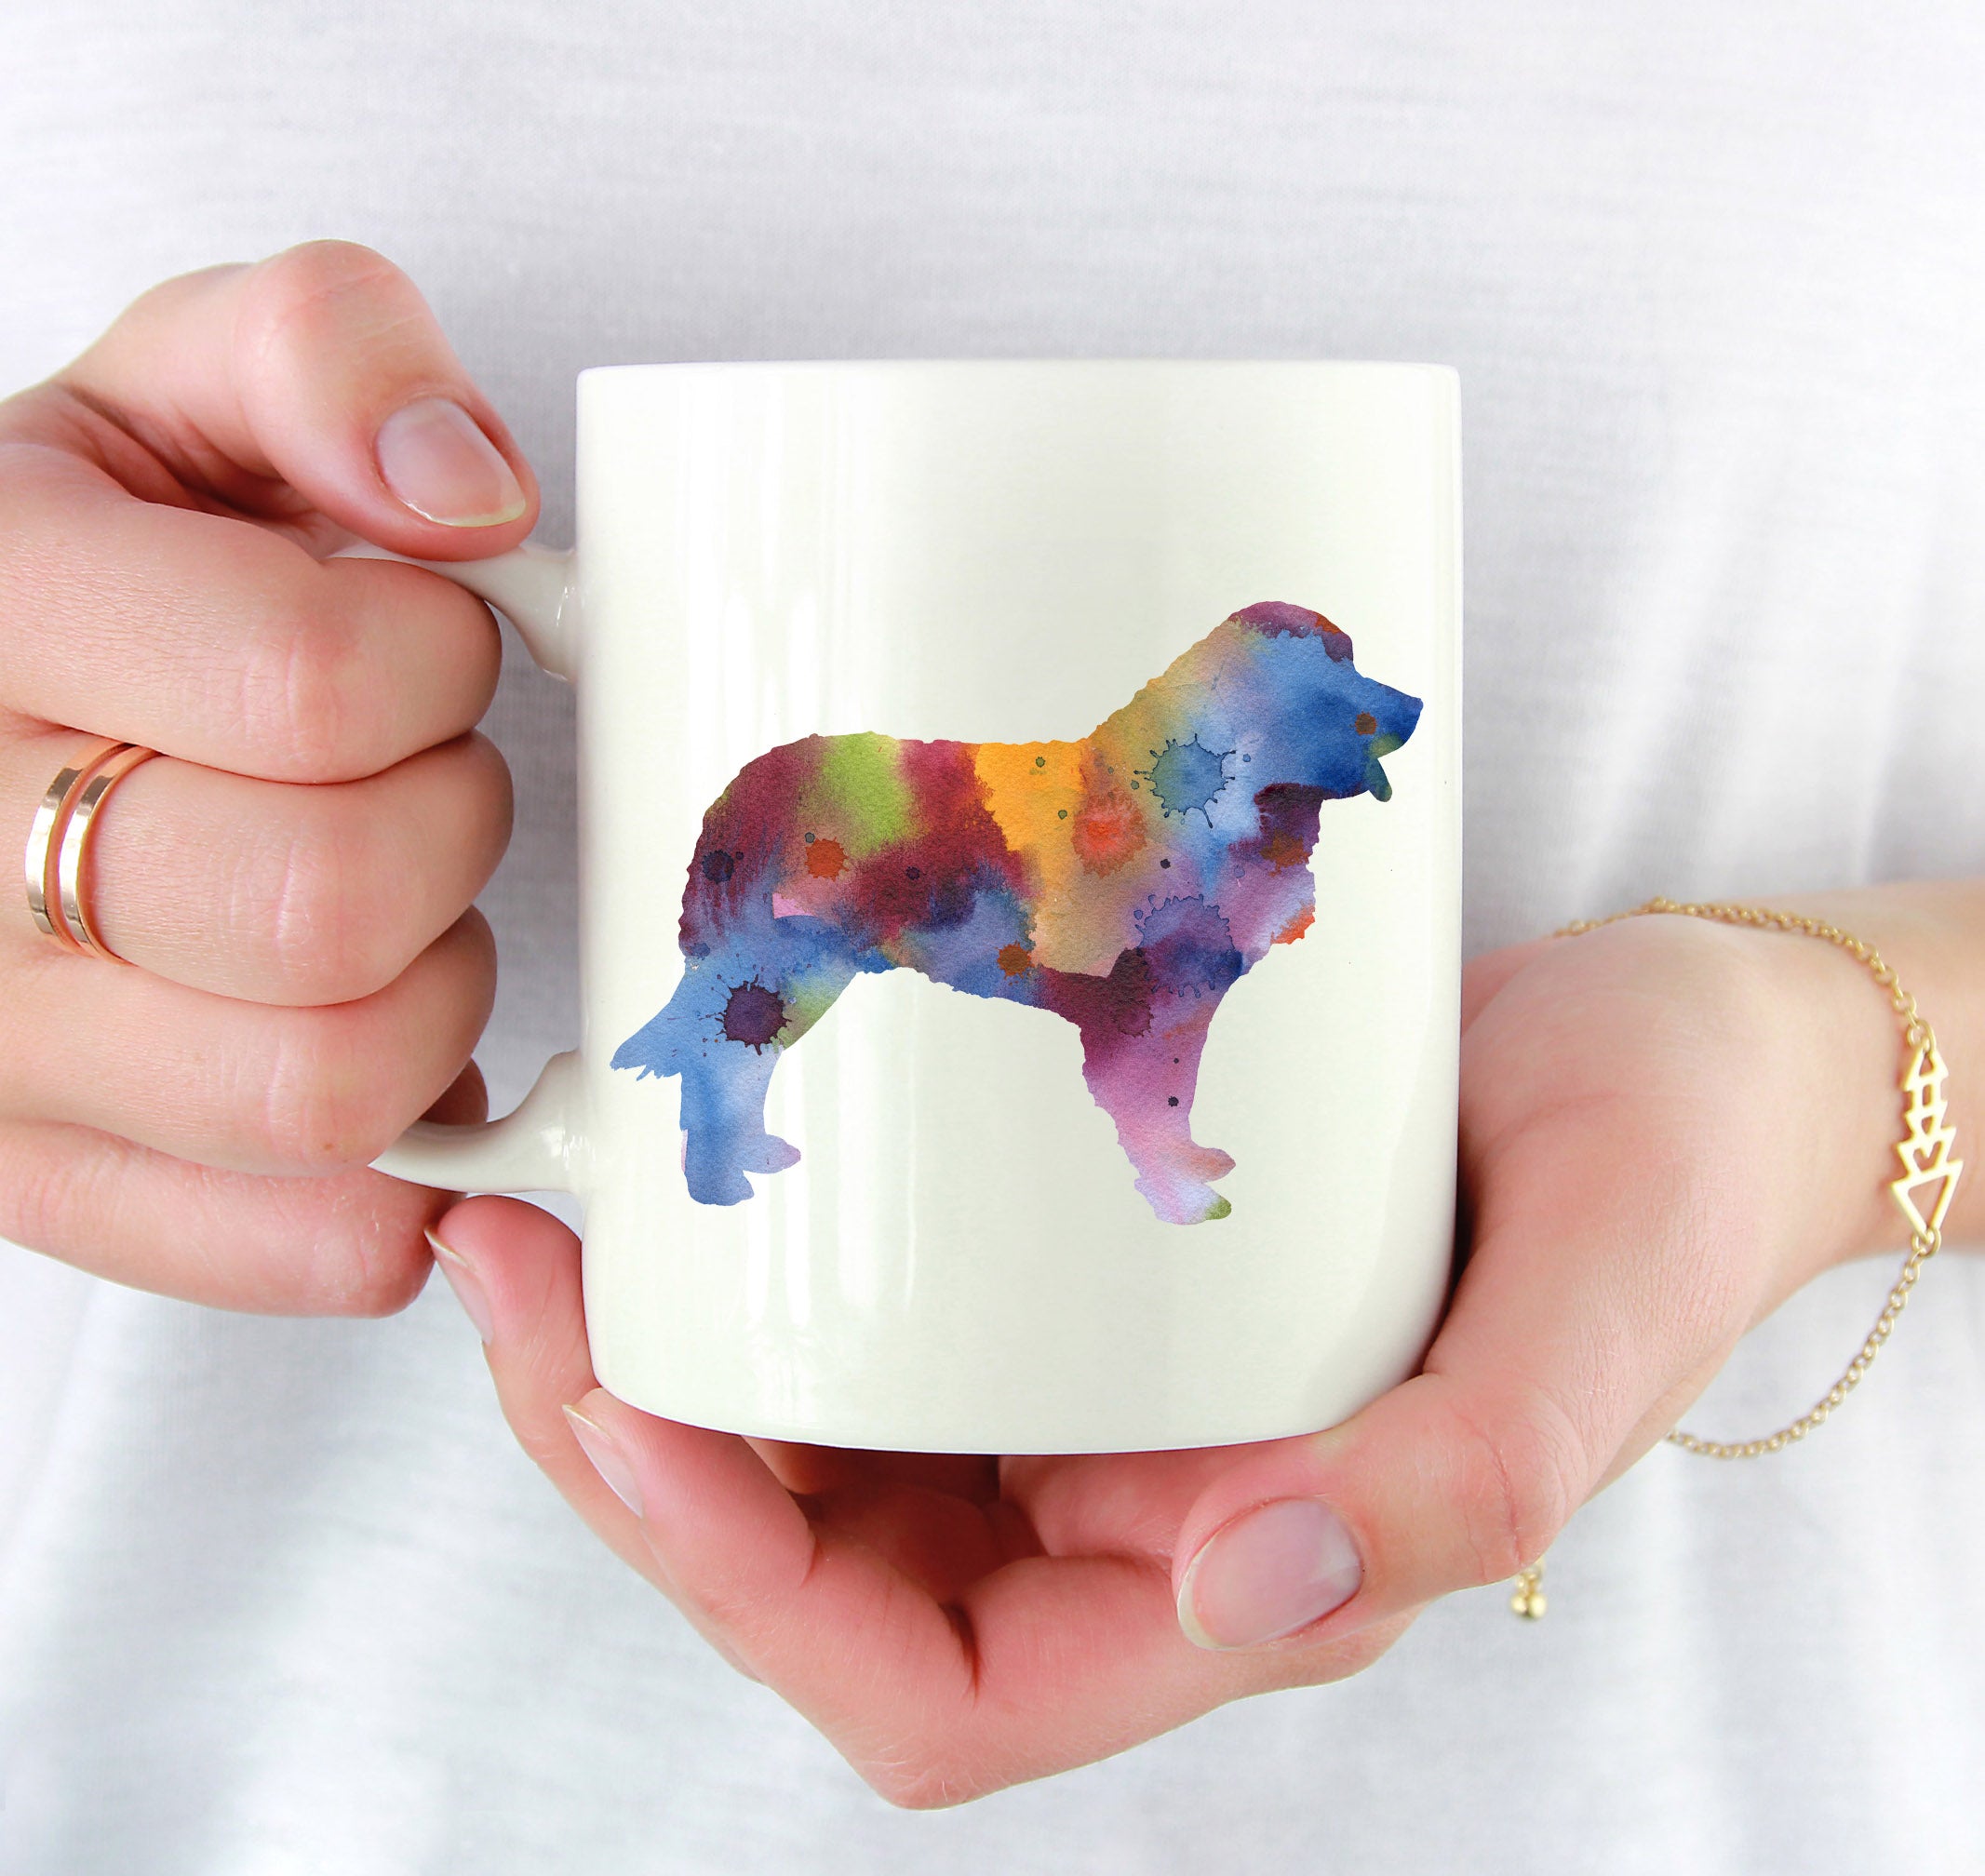 Leonberger Abstract Watercolor Mug Art by Artist DJ Rogers